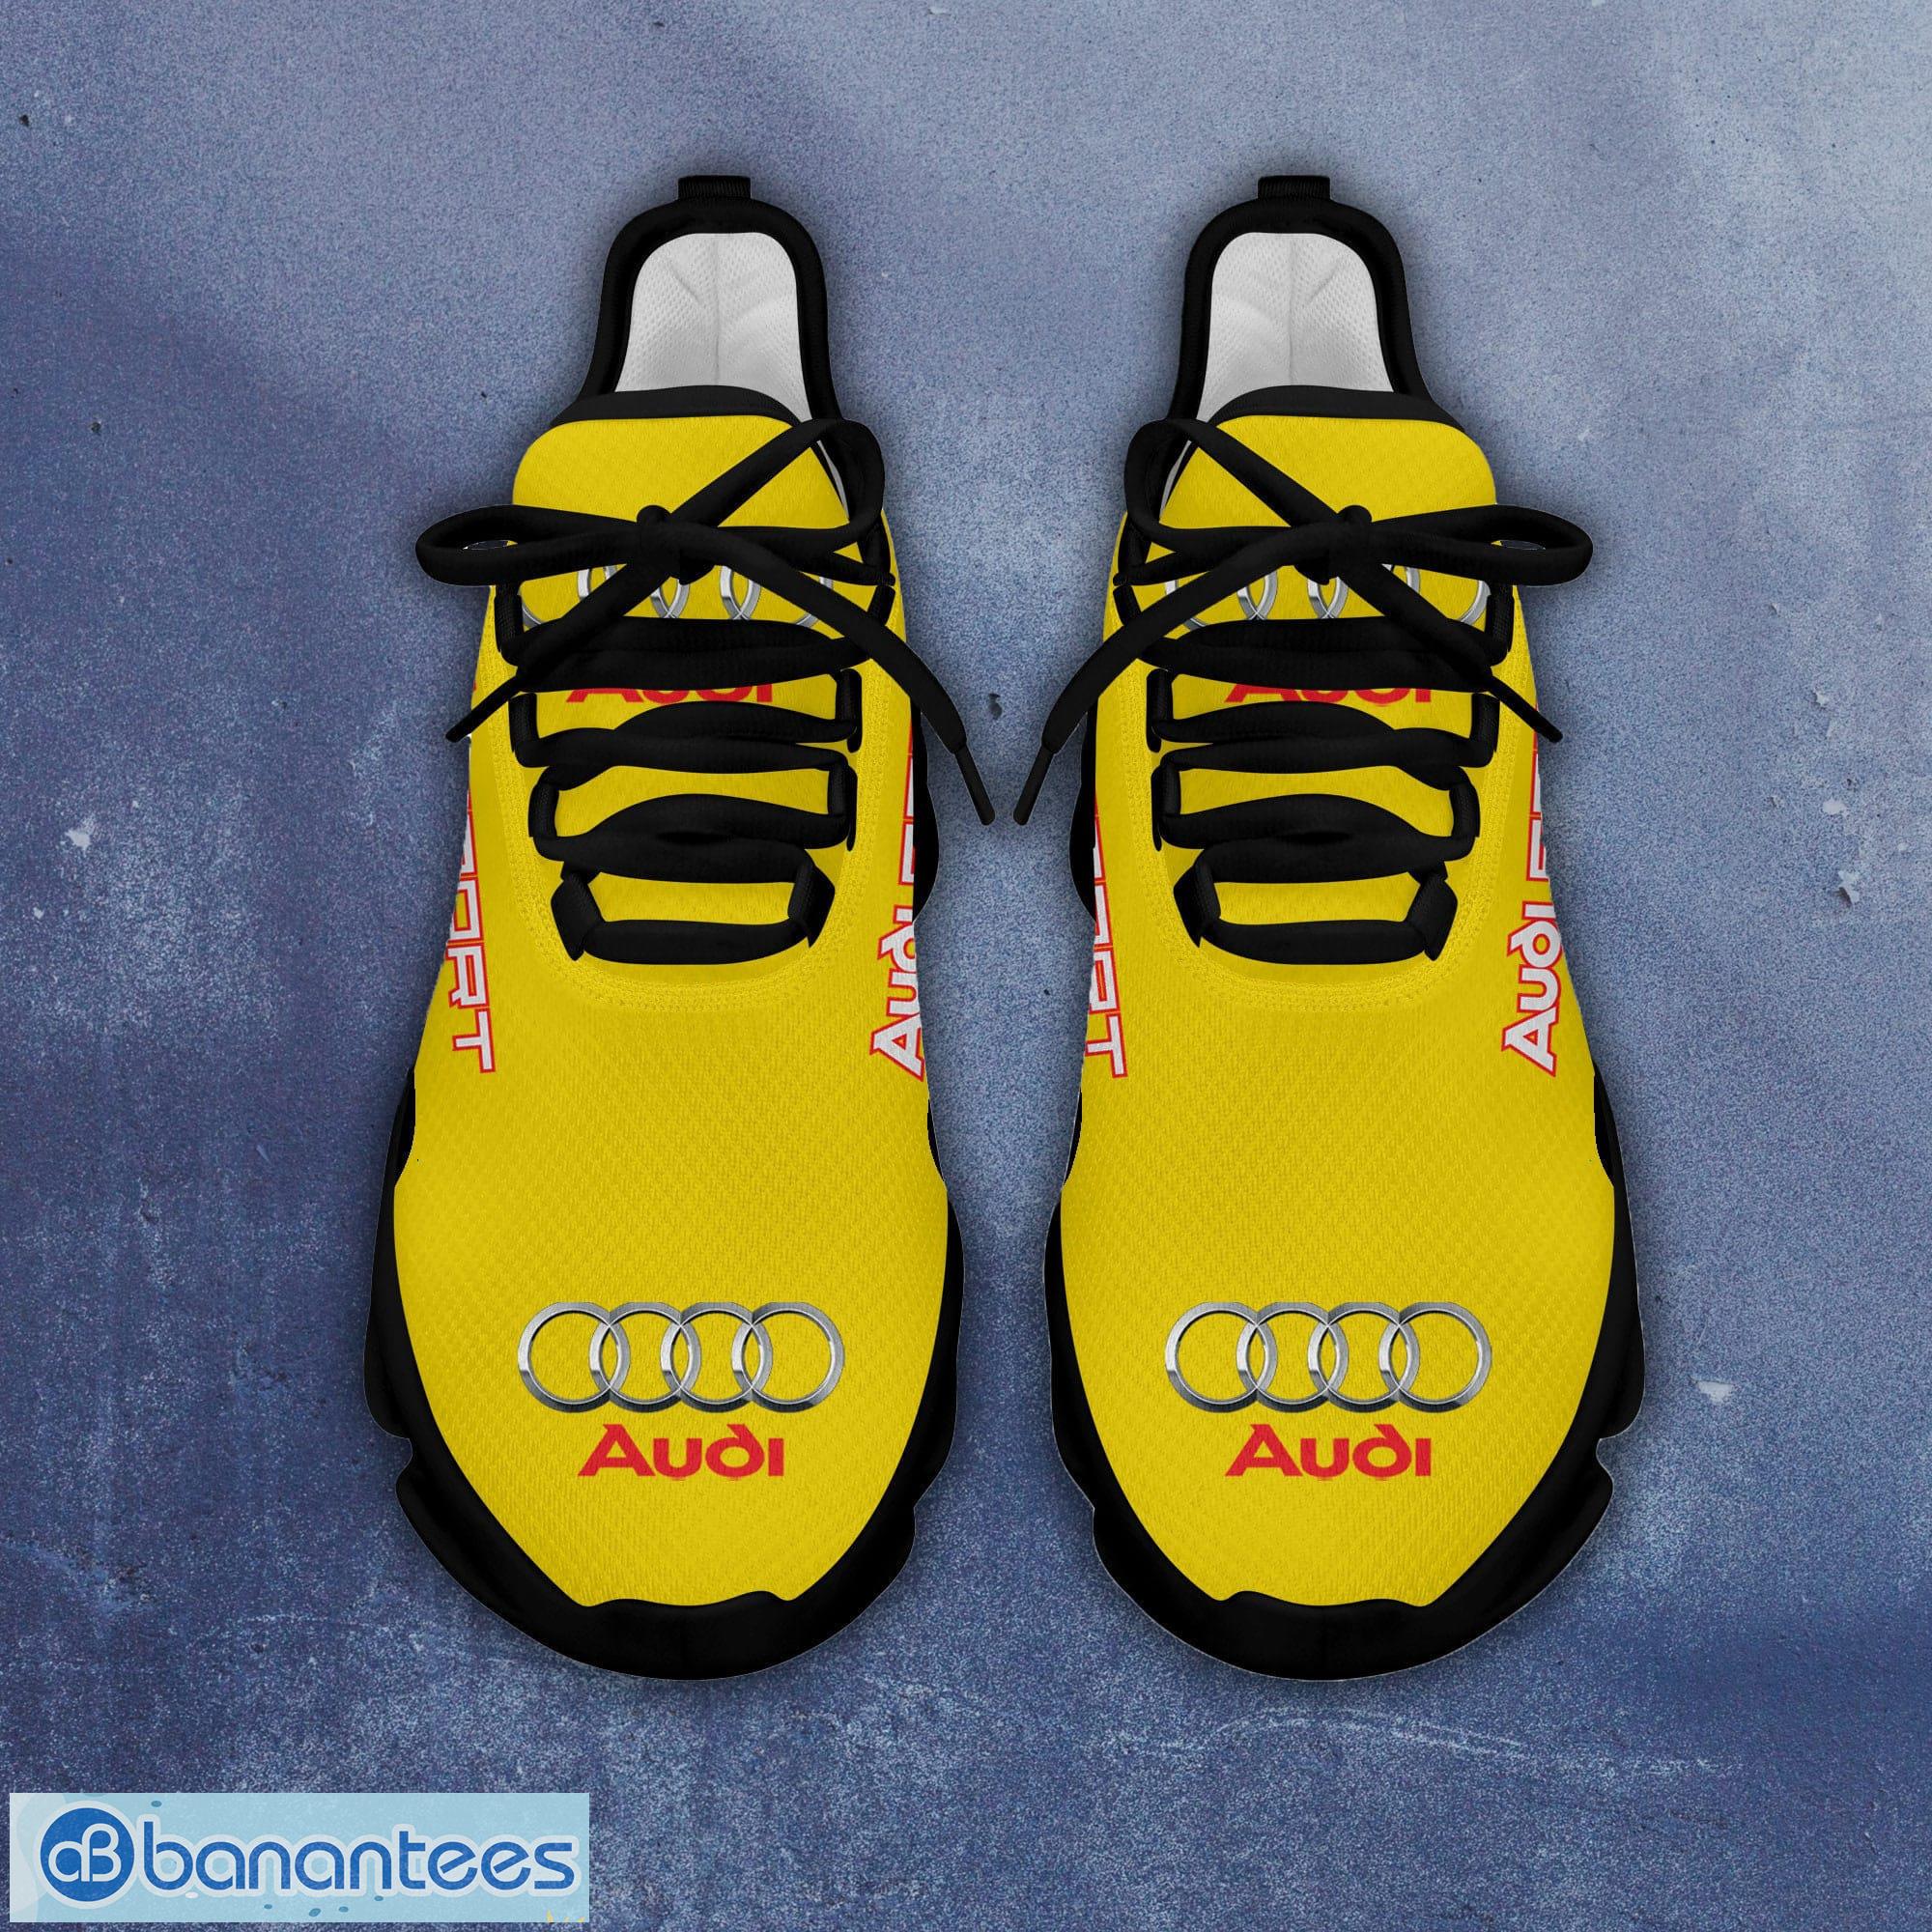 Audi Sport Running Style 12 Max Soul Shoes Men And Women For Fans